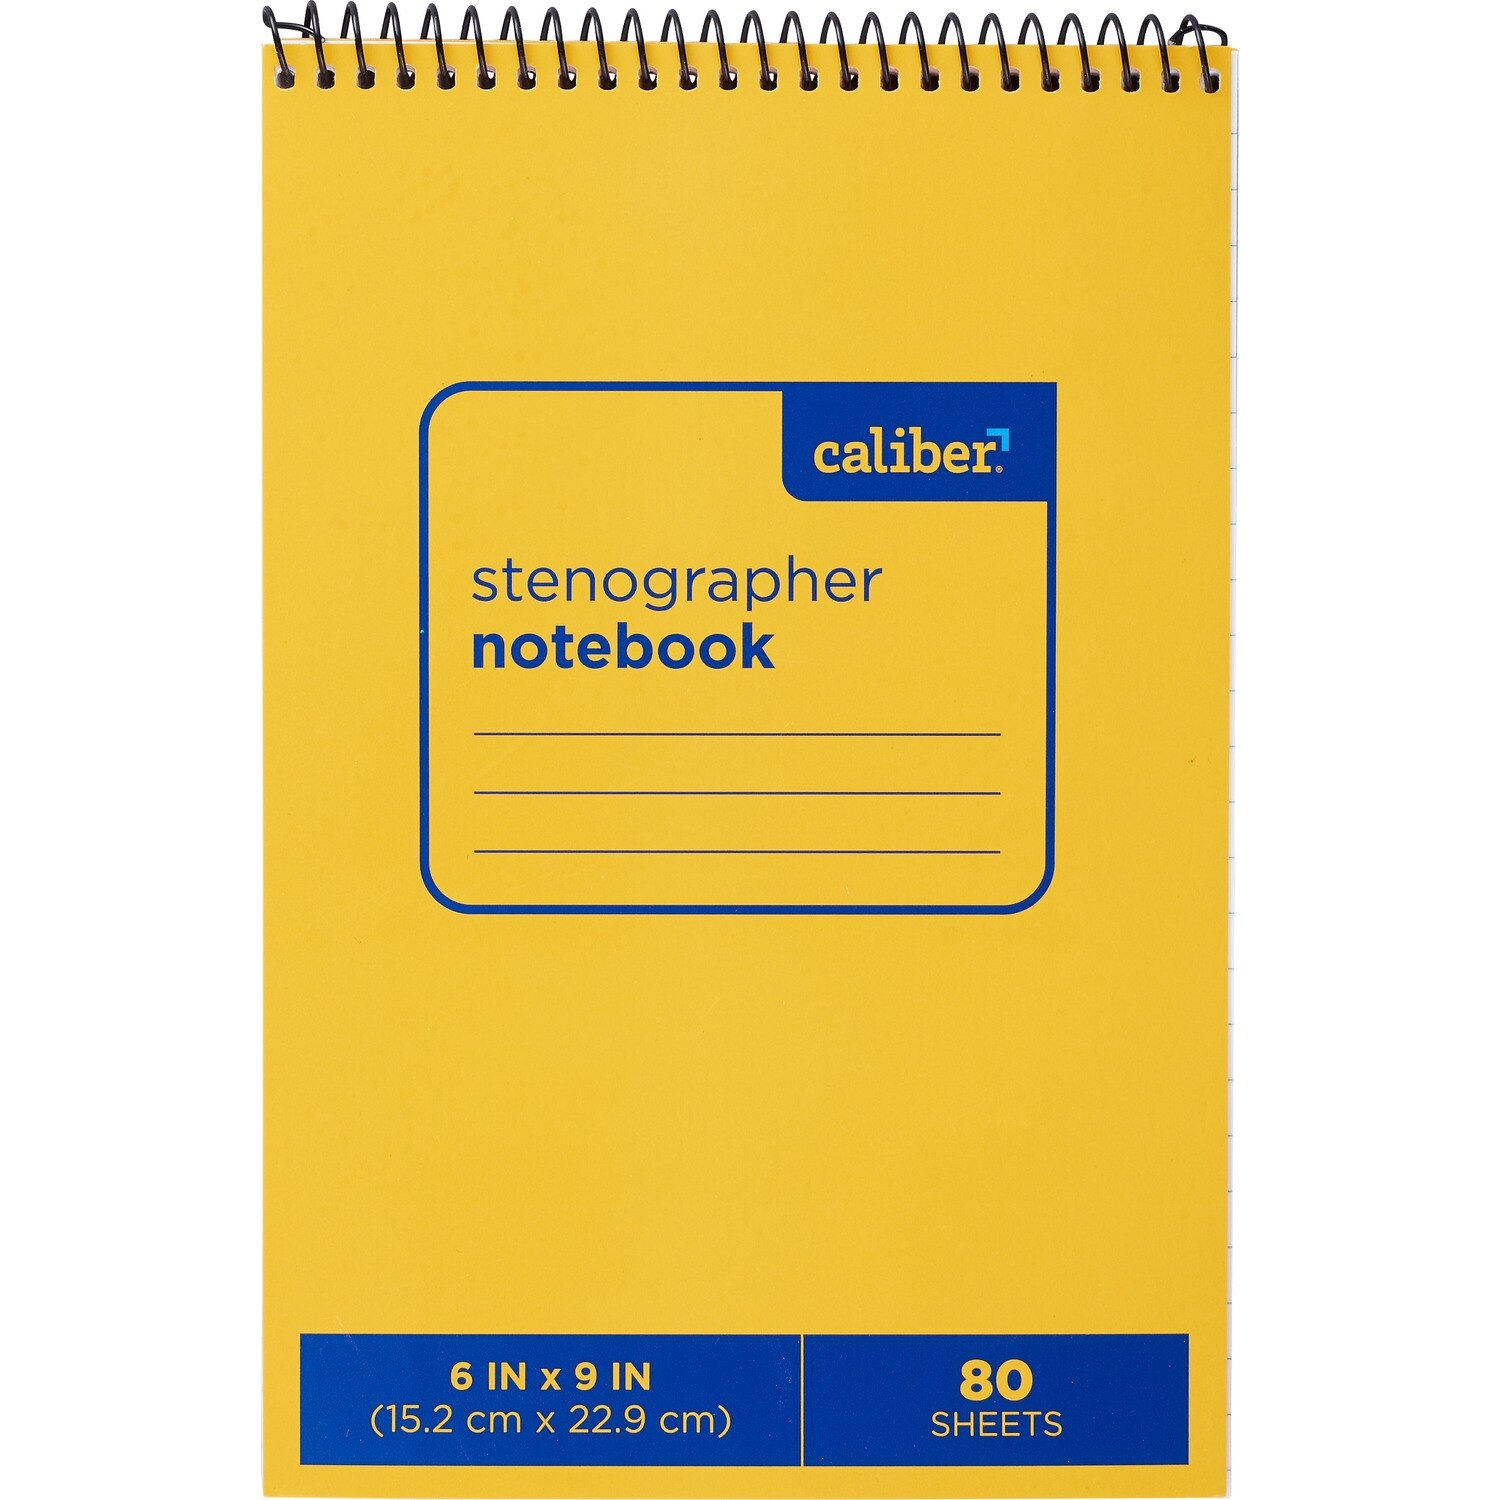 Caliber Stenographer Notebook 6 in. x 9 in., 80 Sheets